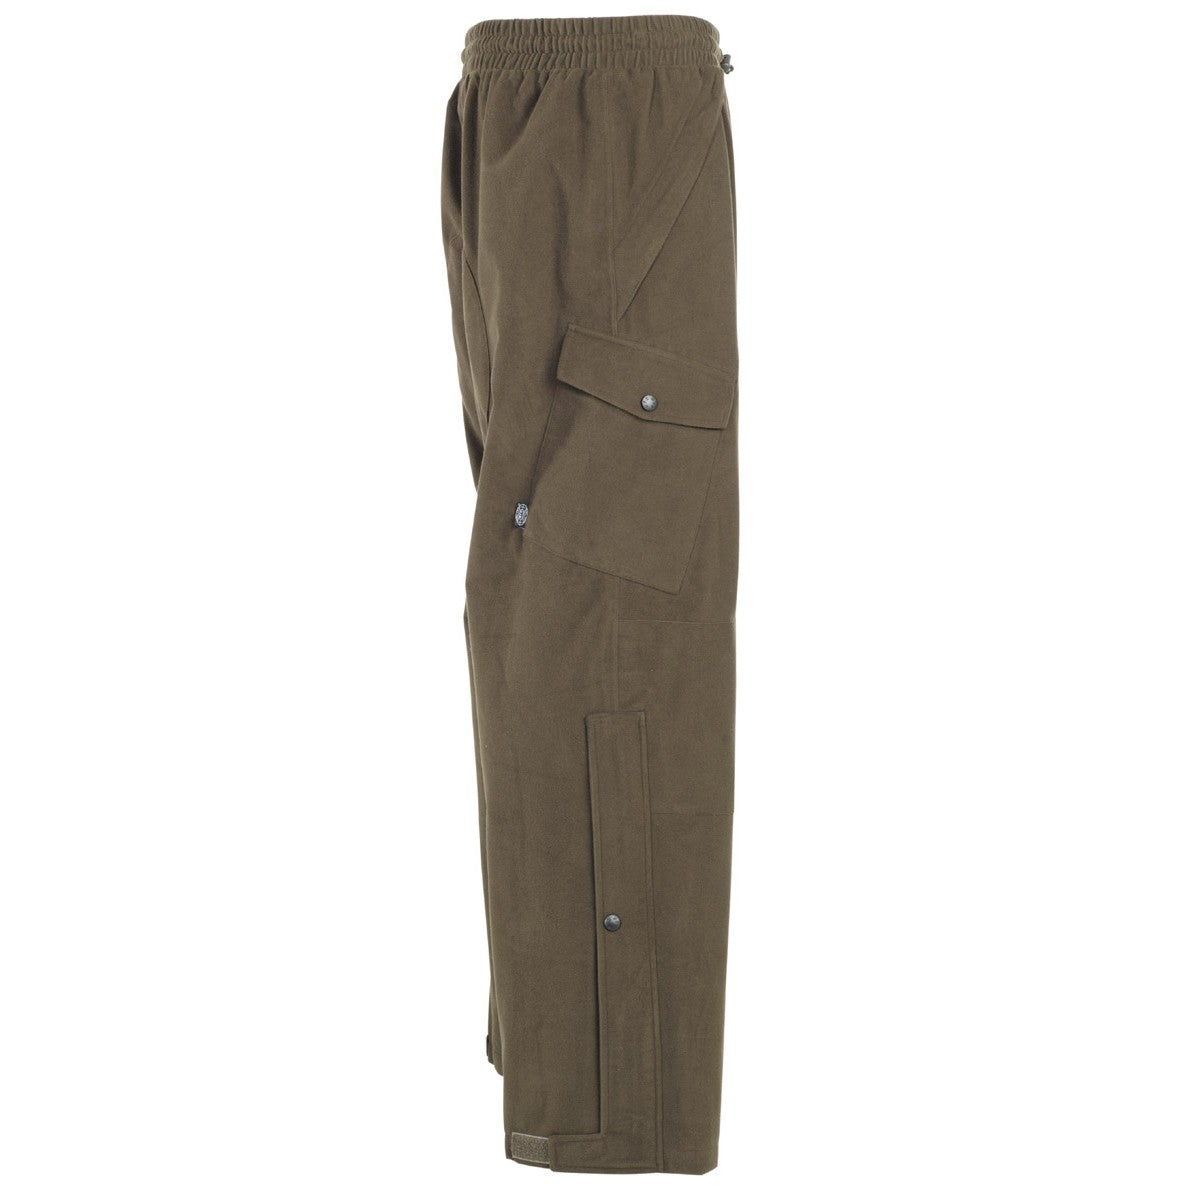 Pantalone outdoor, vodonepropusne  MFH poly tricot